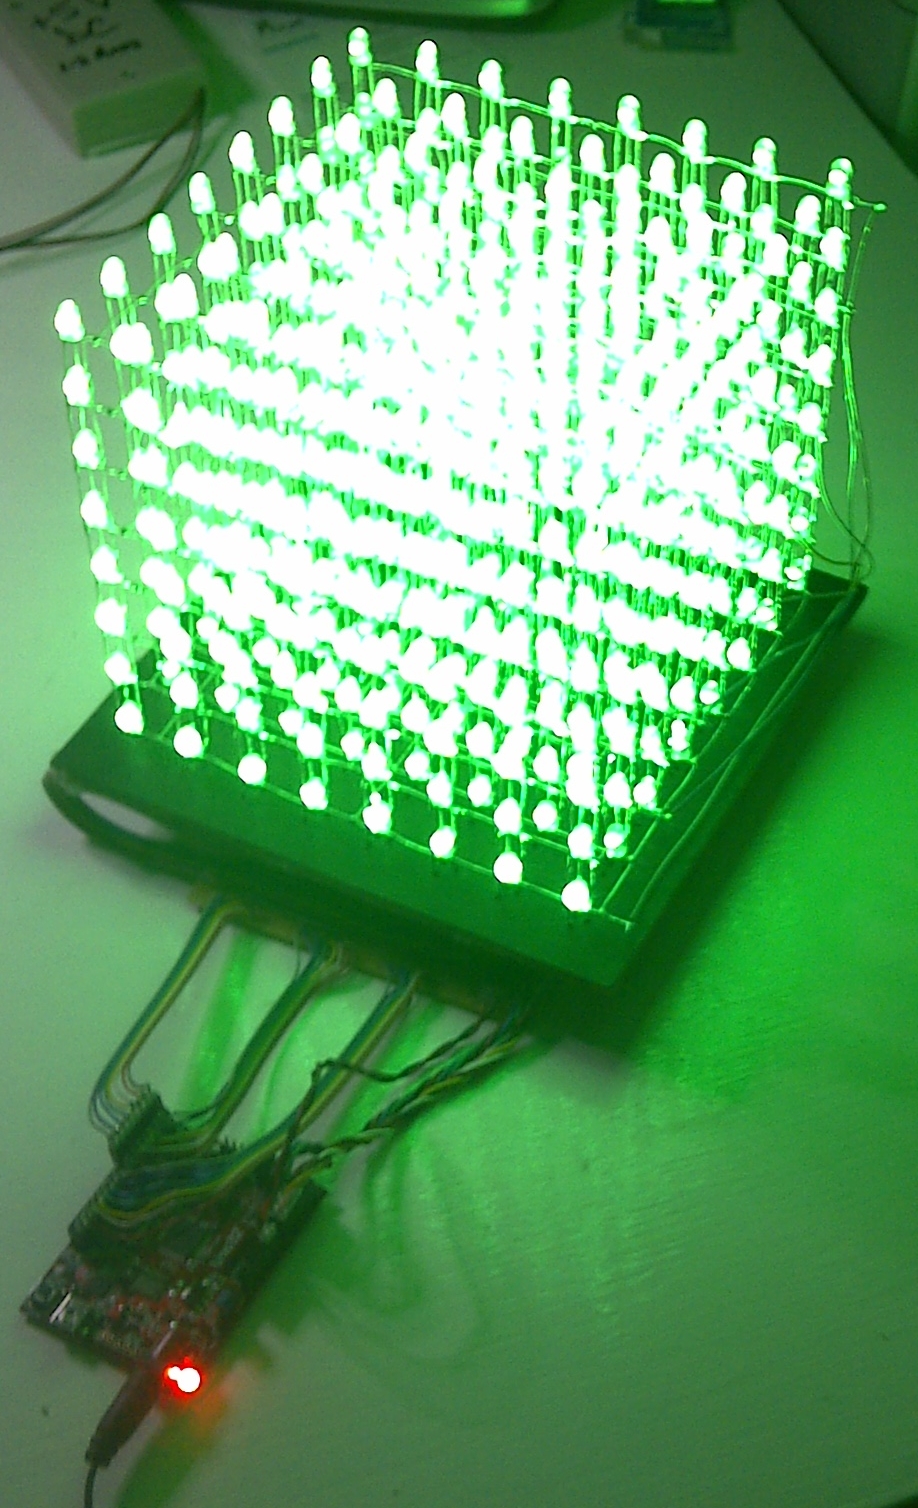 The GREEN part of all the LEDs on